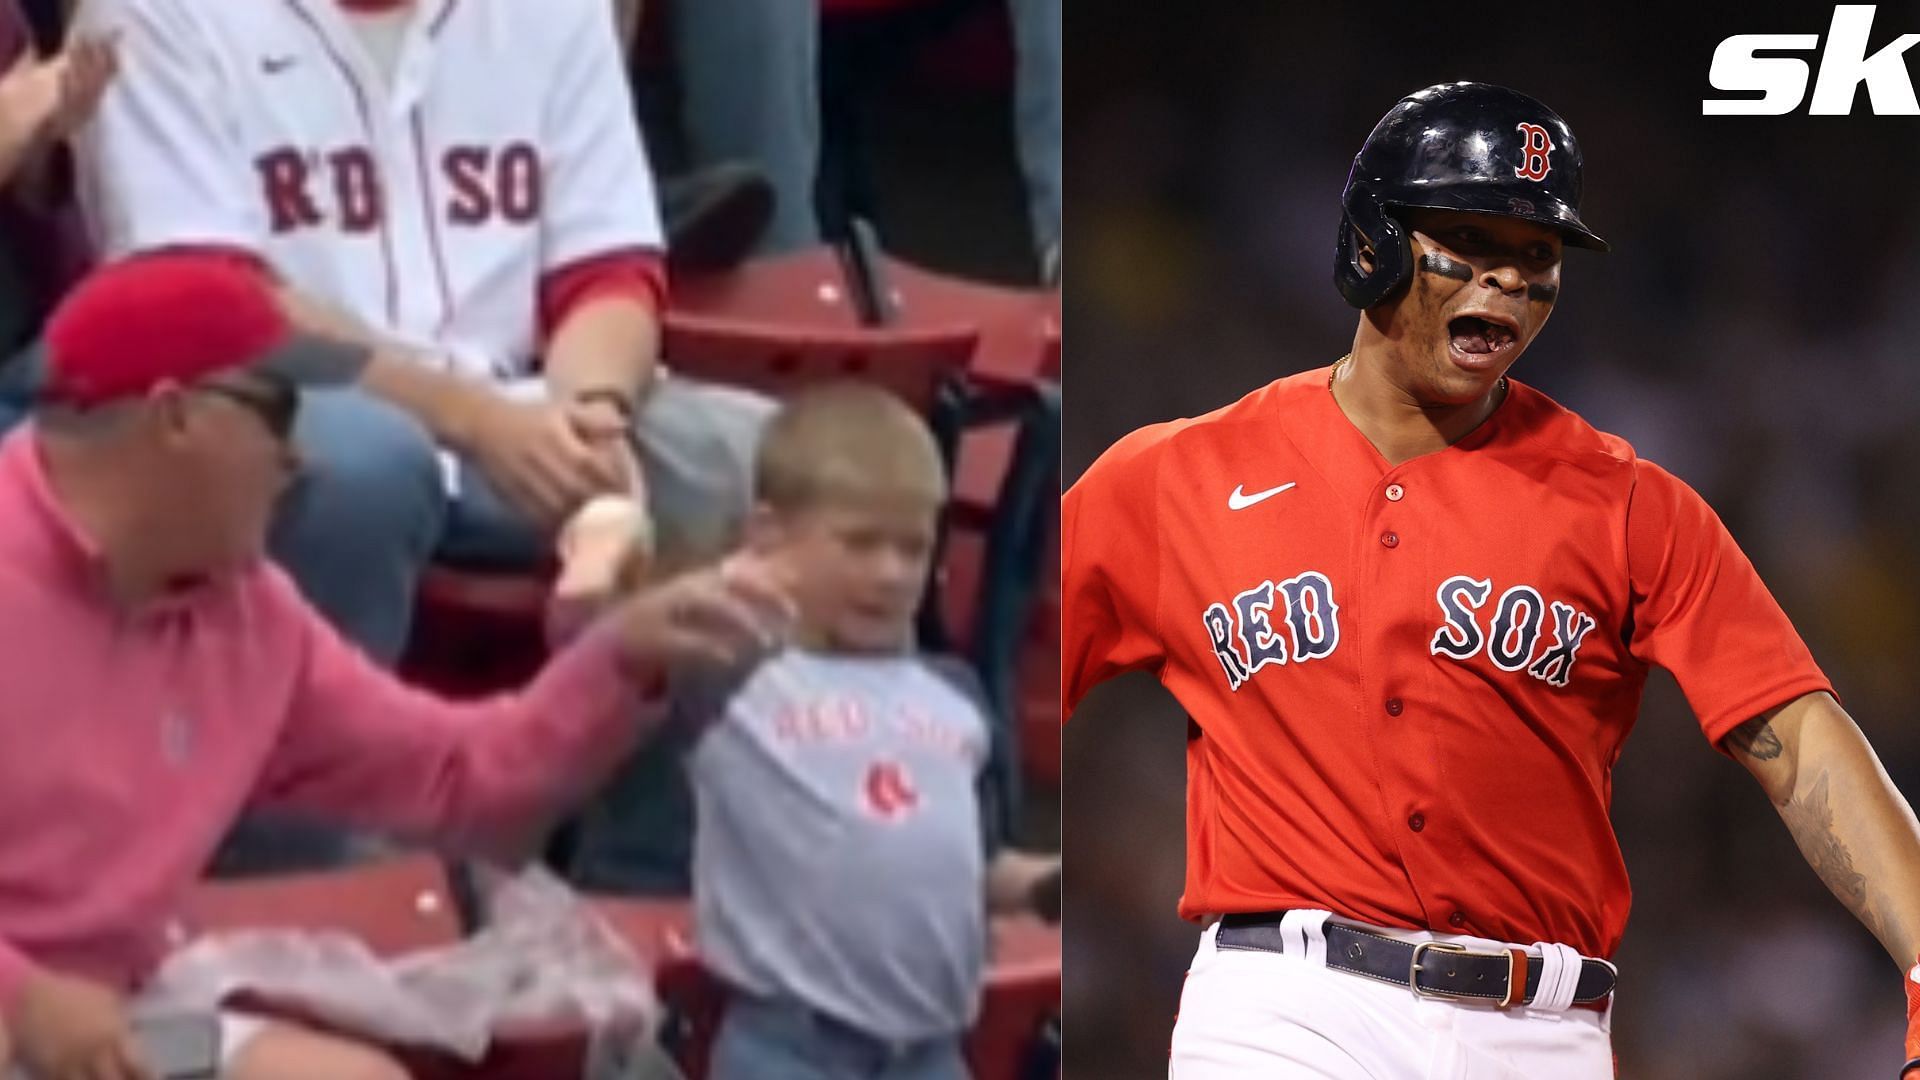 A young Boston Red Sox fan got more than he expected on Sunday